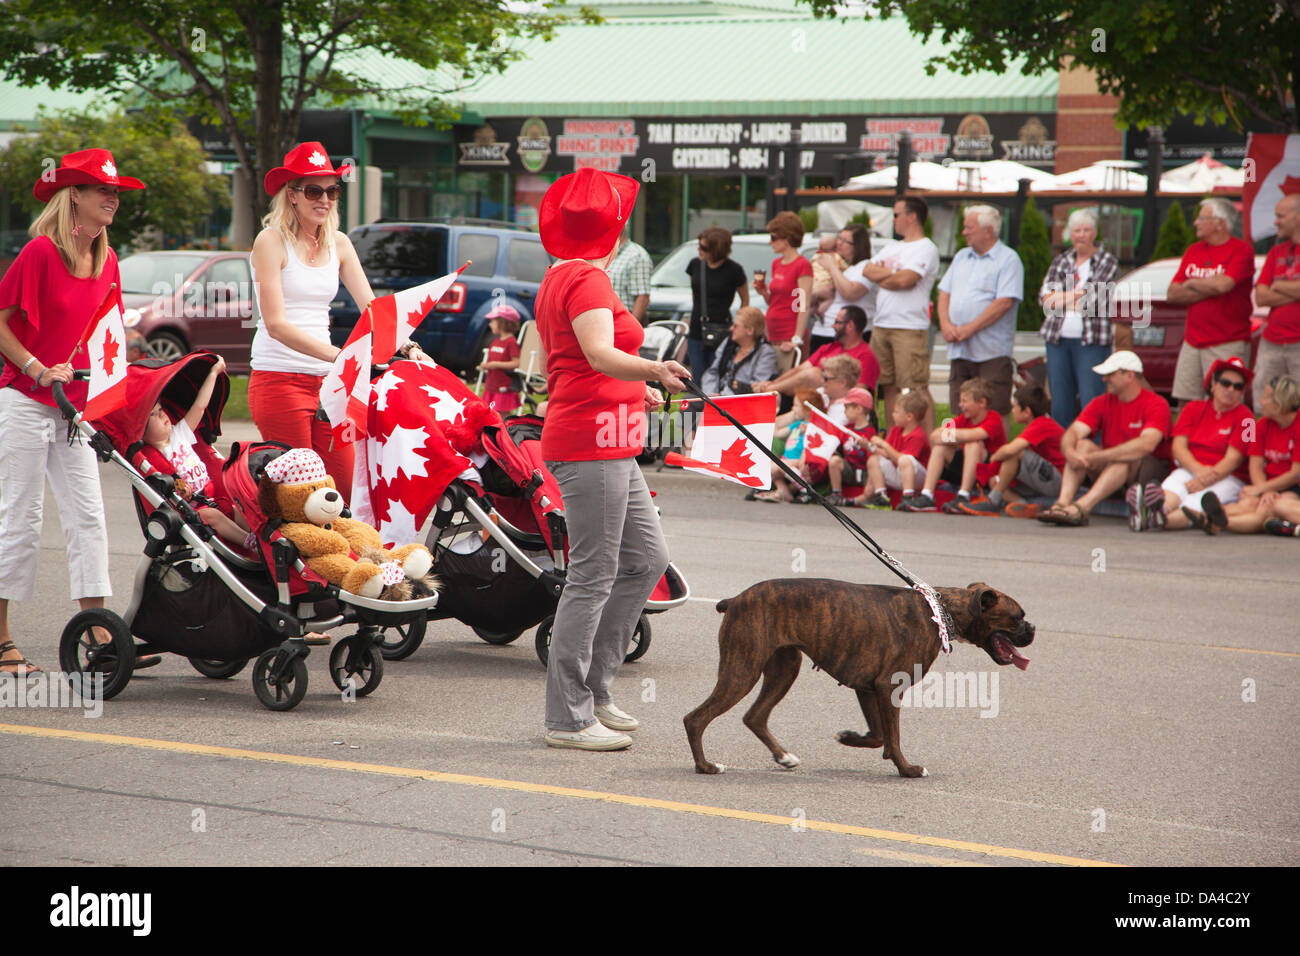 AURORA, ONTARIO, CANADA- JULY 1: Canada Day Parade at part of Young Street in Aurora on July 1, 2013 Stock Photo